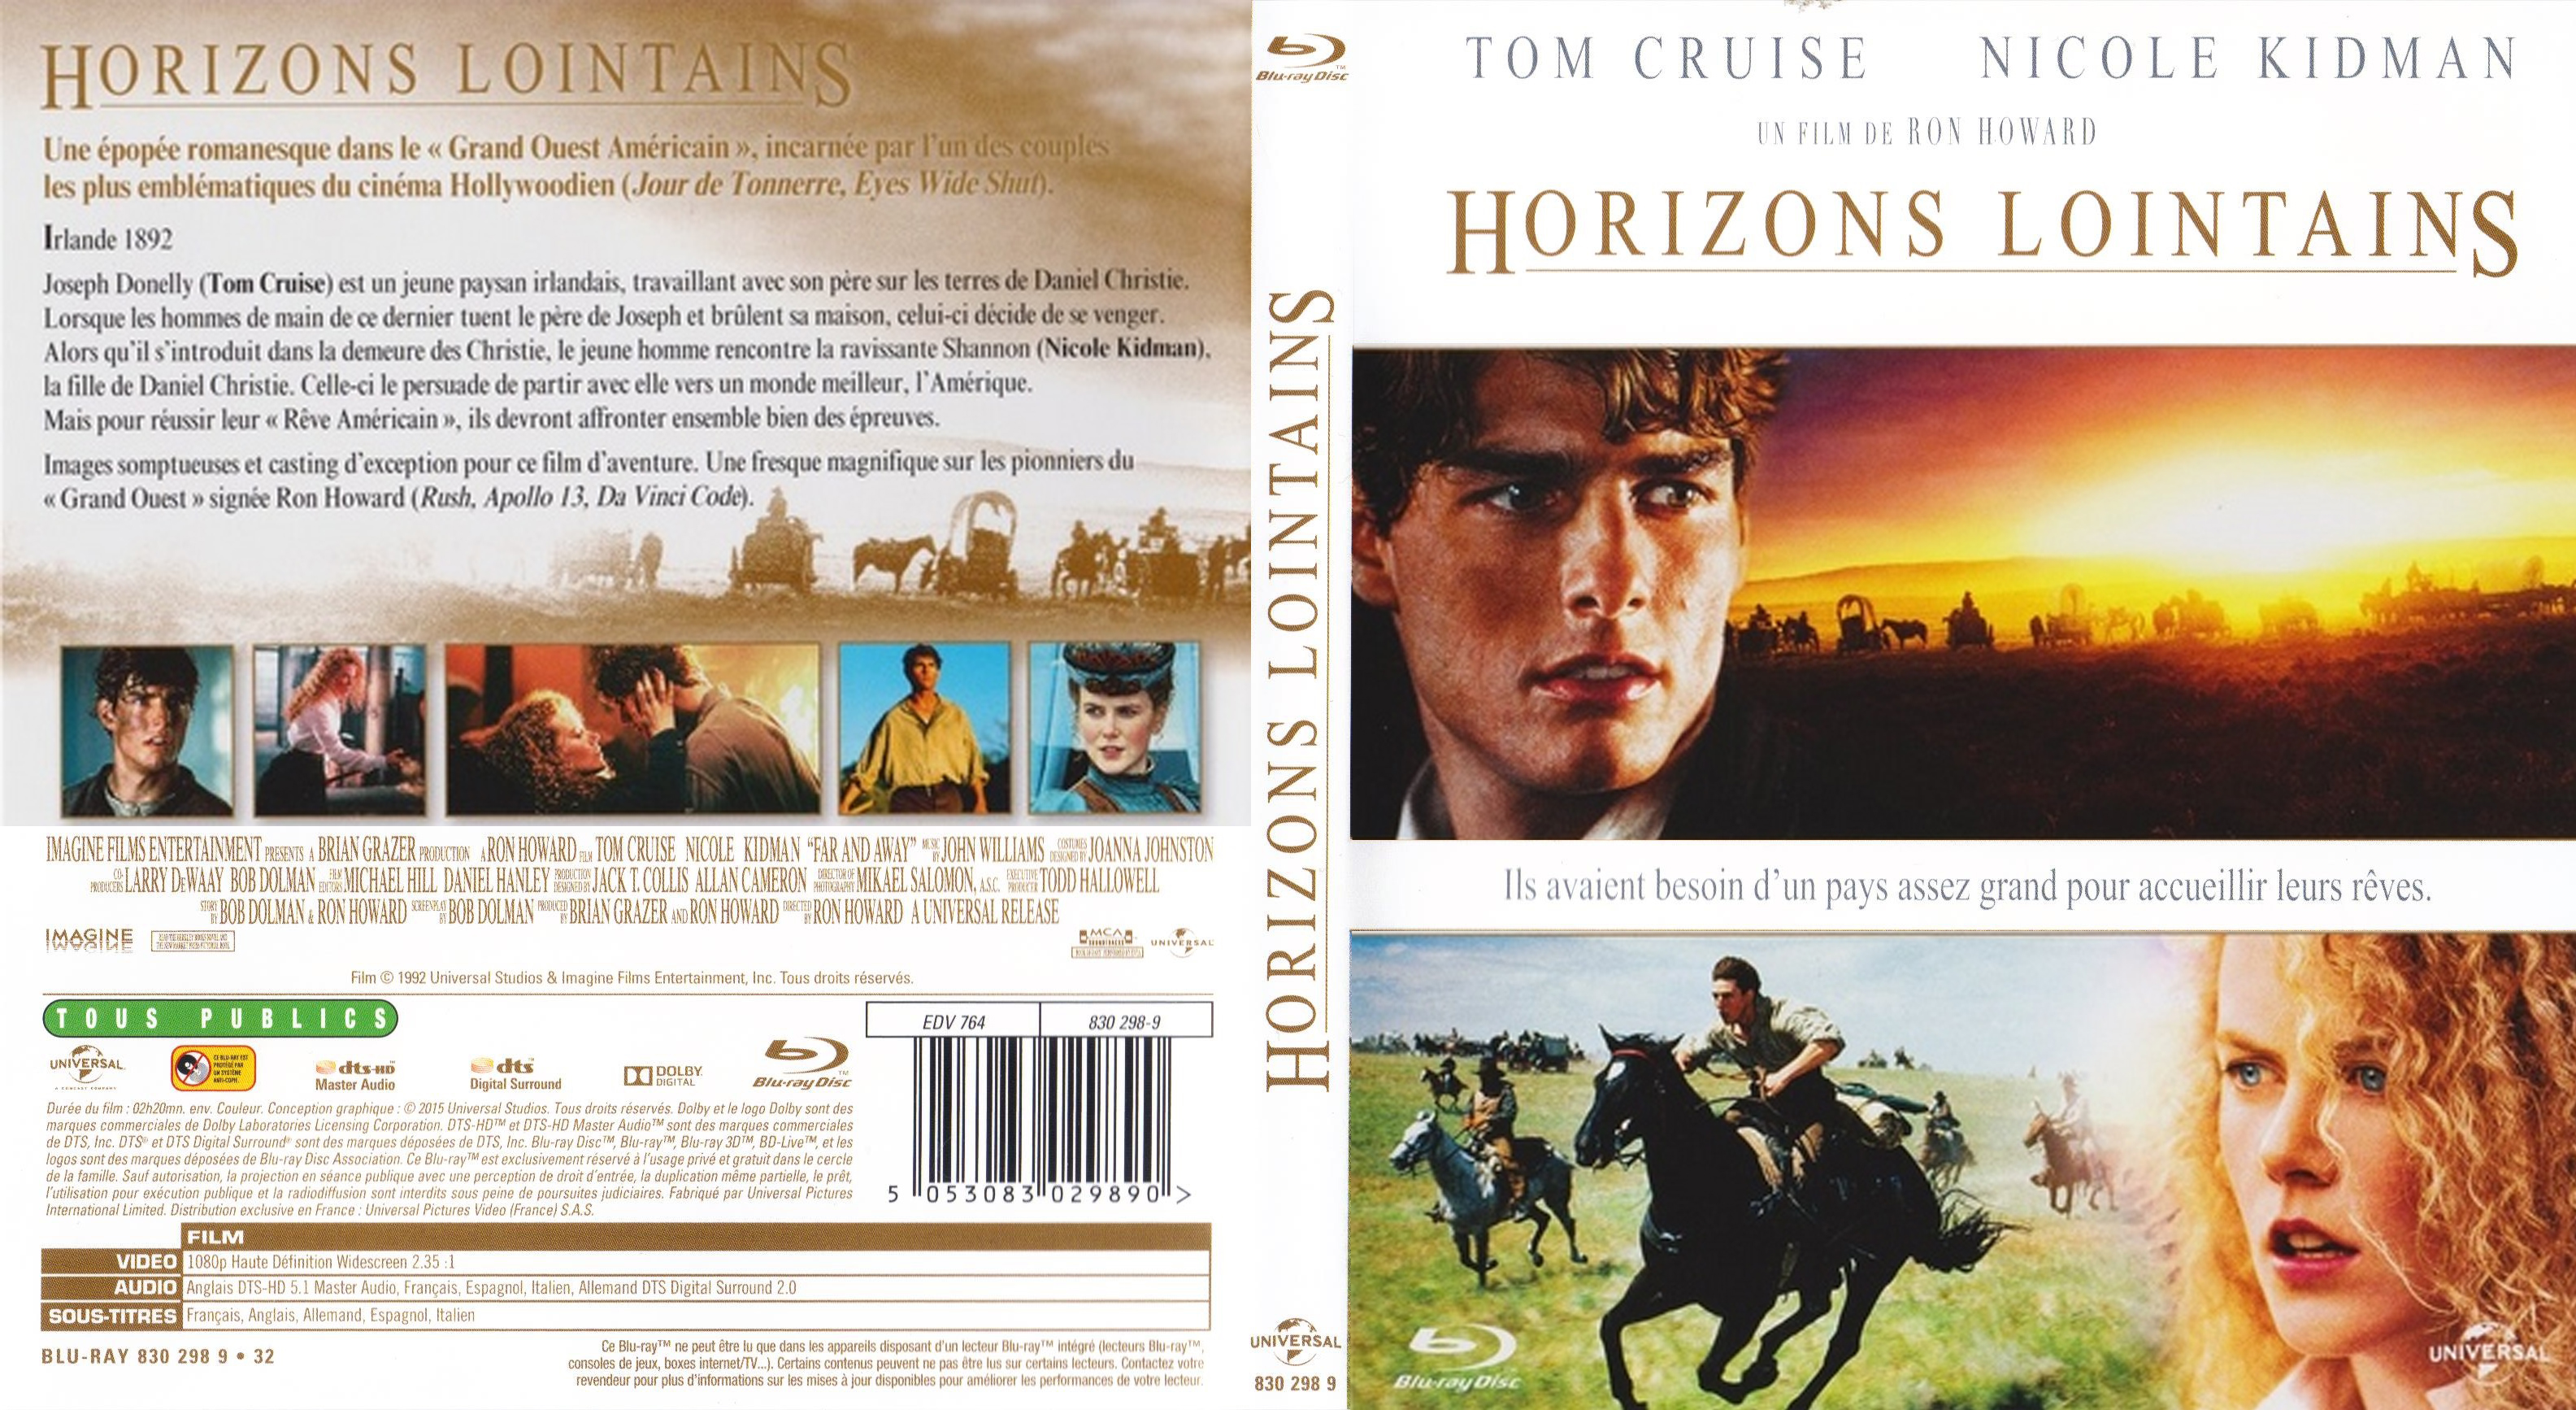 Jaquette DVD Horizons lointains (BLU-RAY)